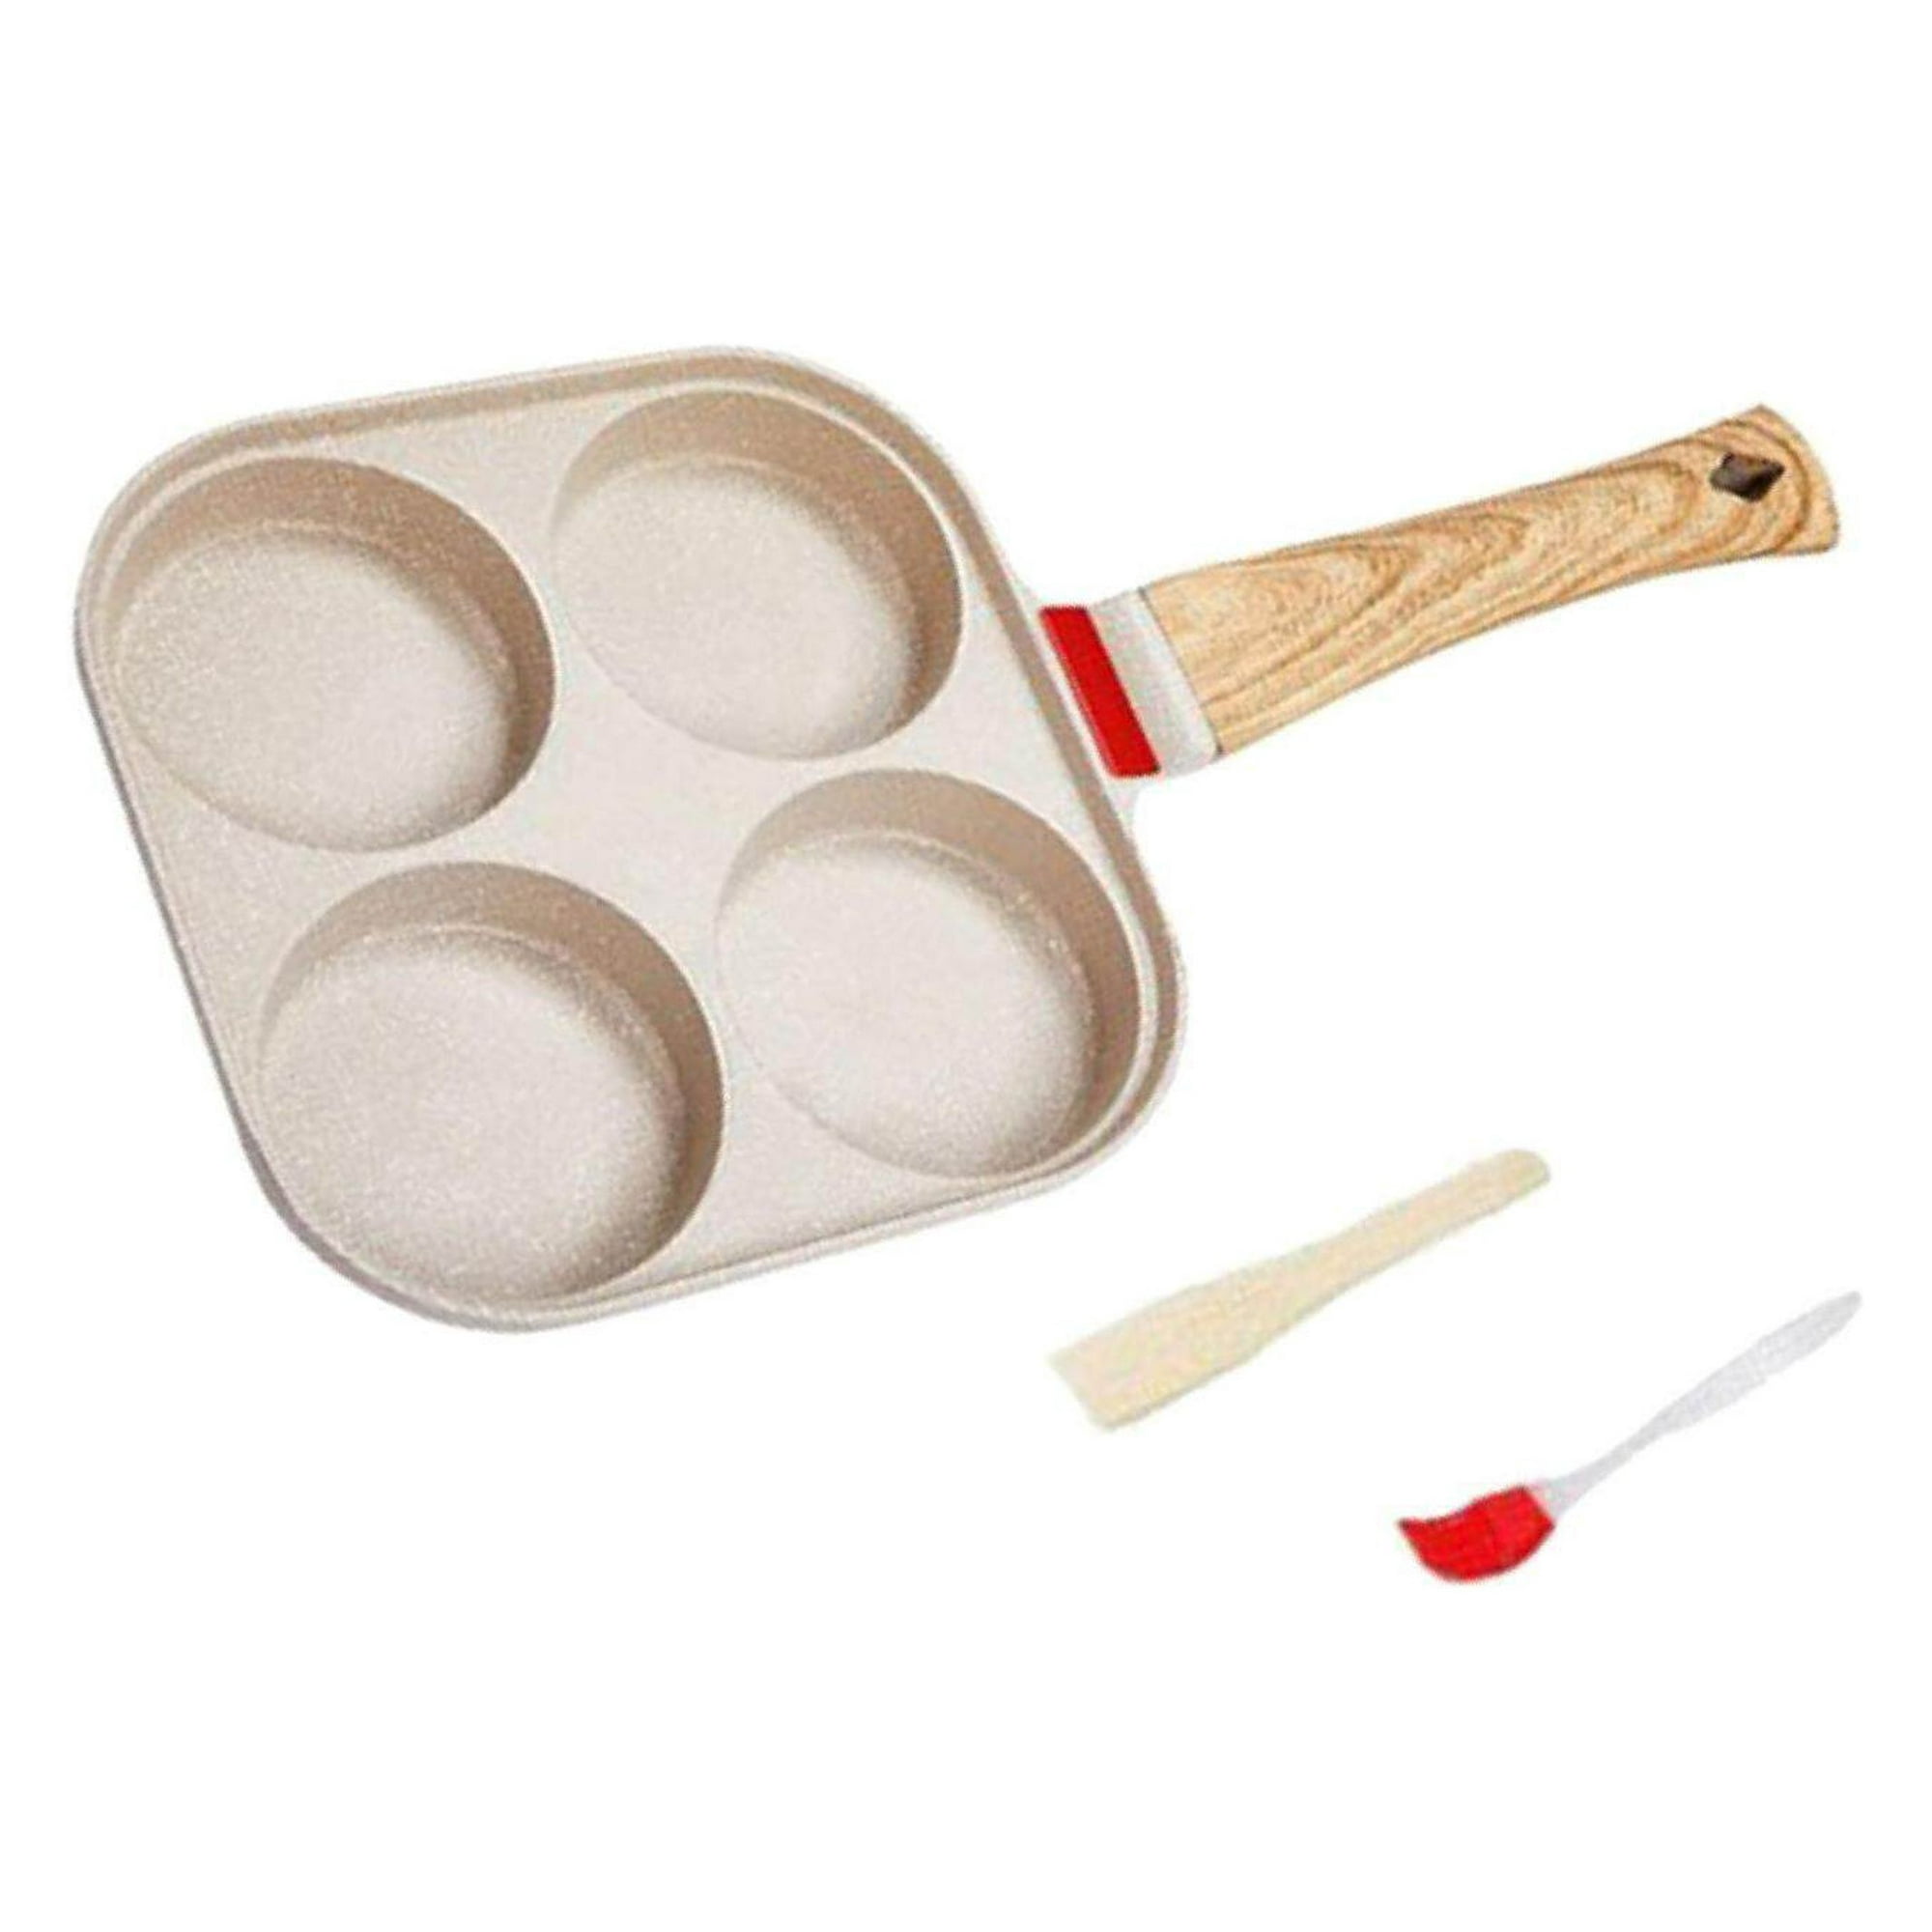 4 Hole Mini Frying Pan Skillet Omelette Egg Frying Pot Fried Egg Cooker Thickened Omelet Restaurant Party with Lid, Size: 19cmx19cm, White